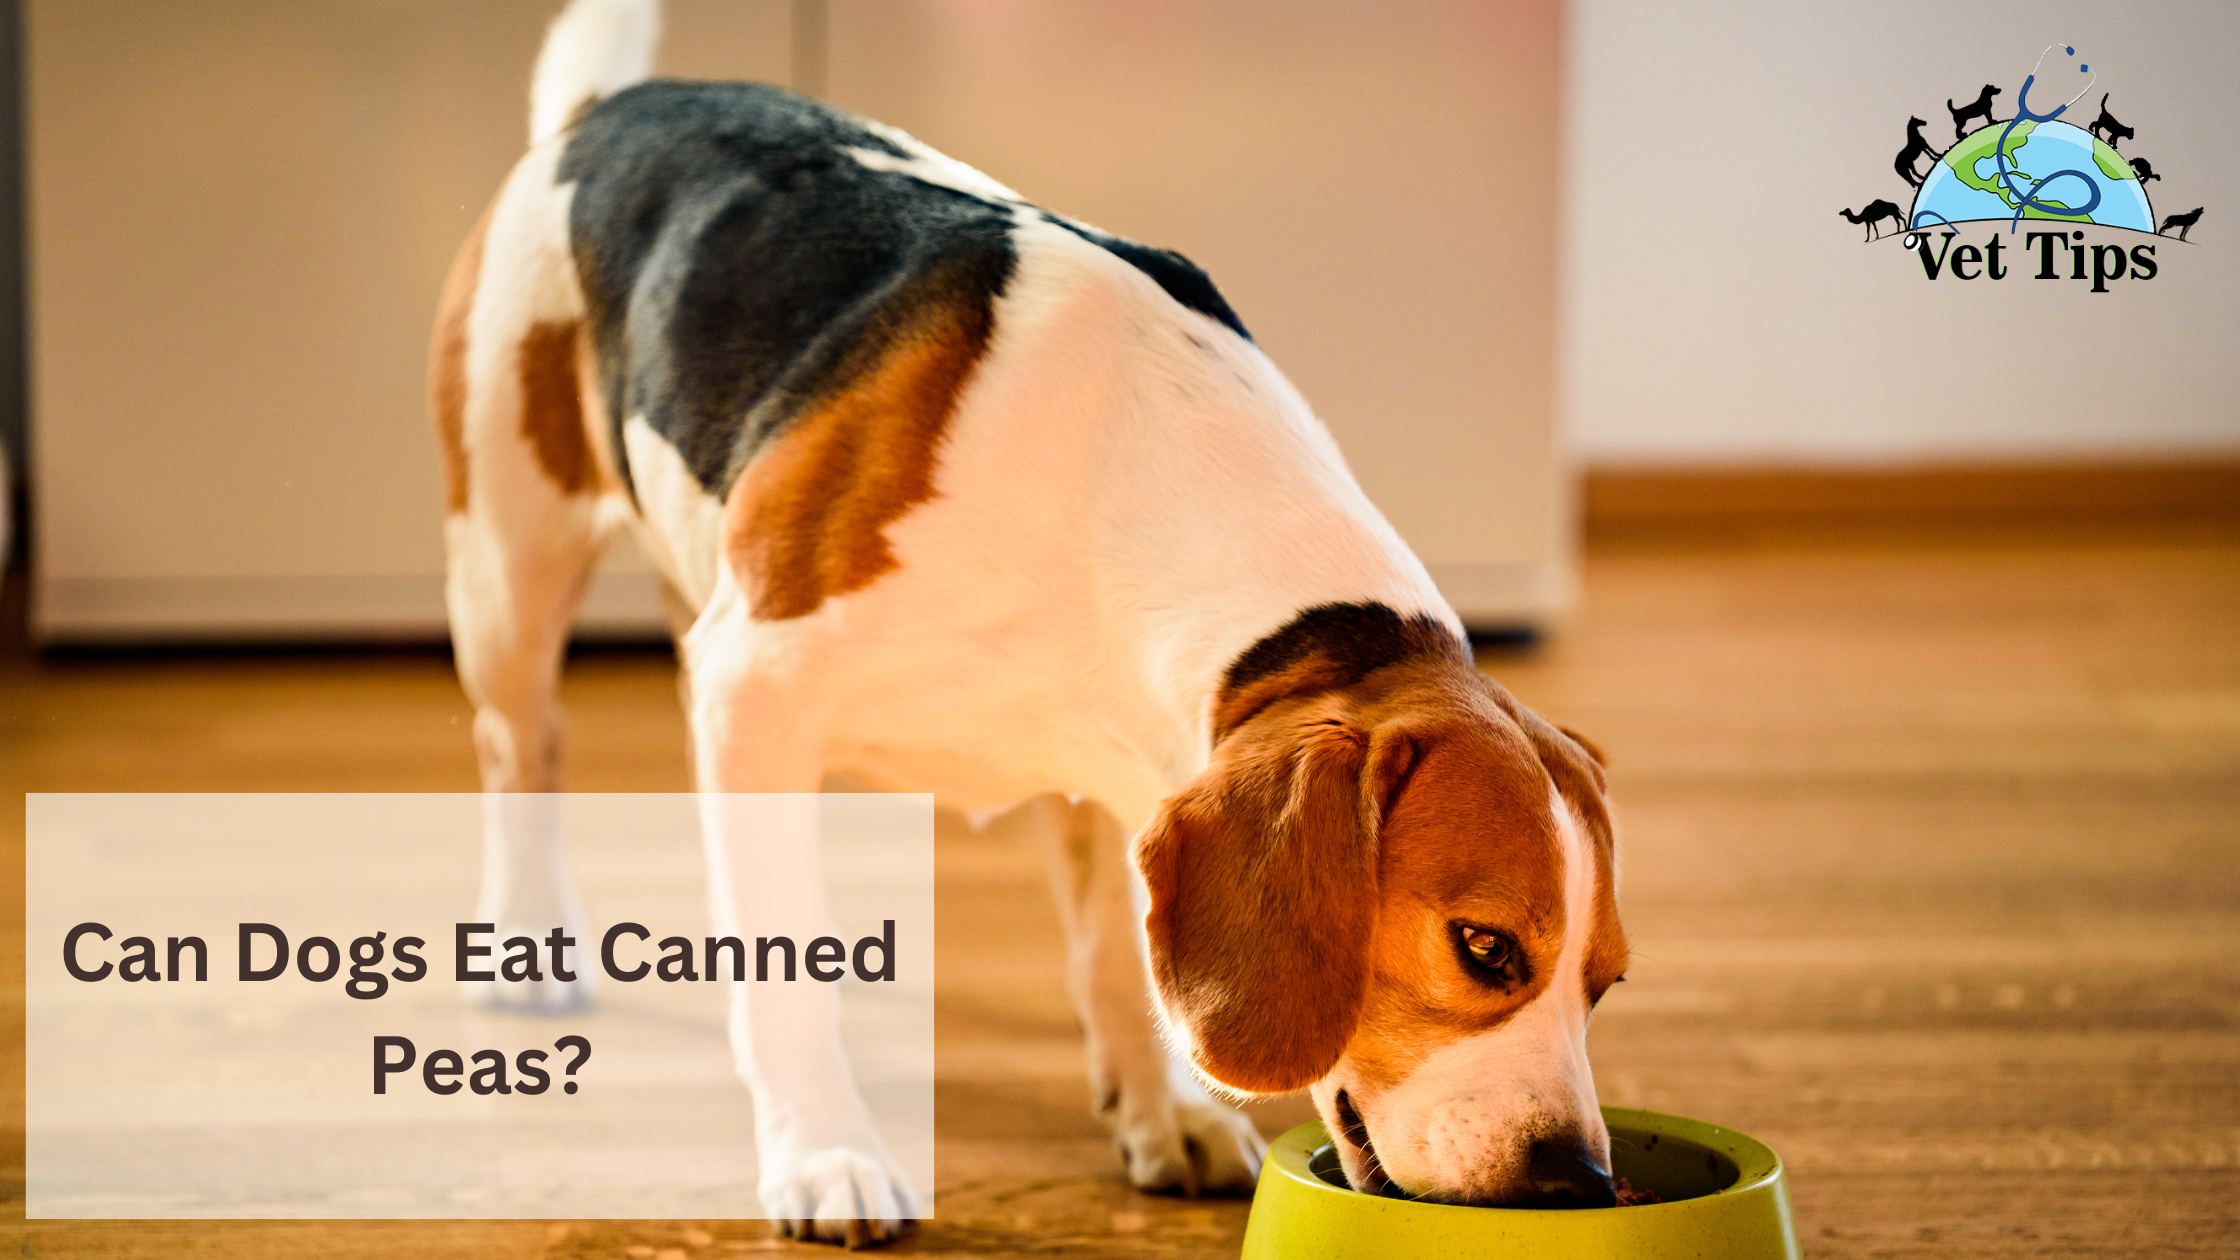 Can Dogs Eat Canned Peas?